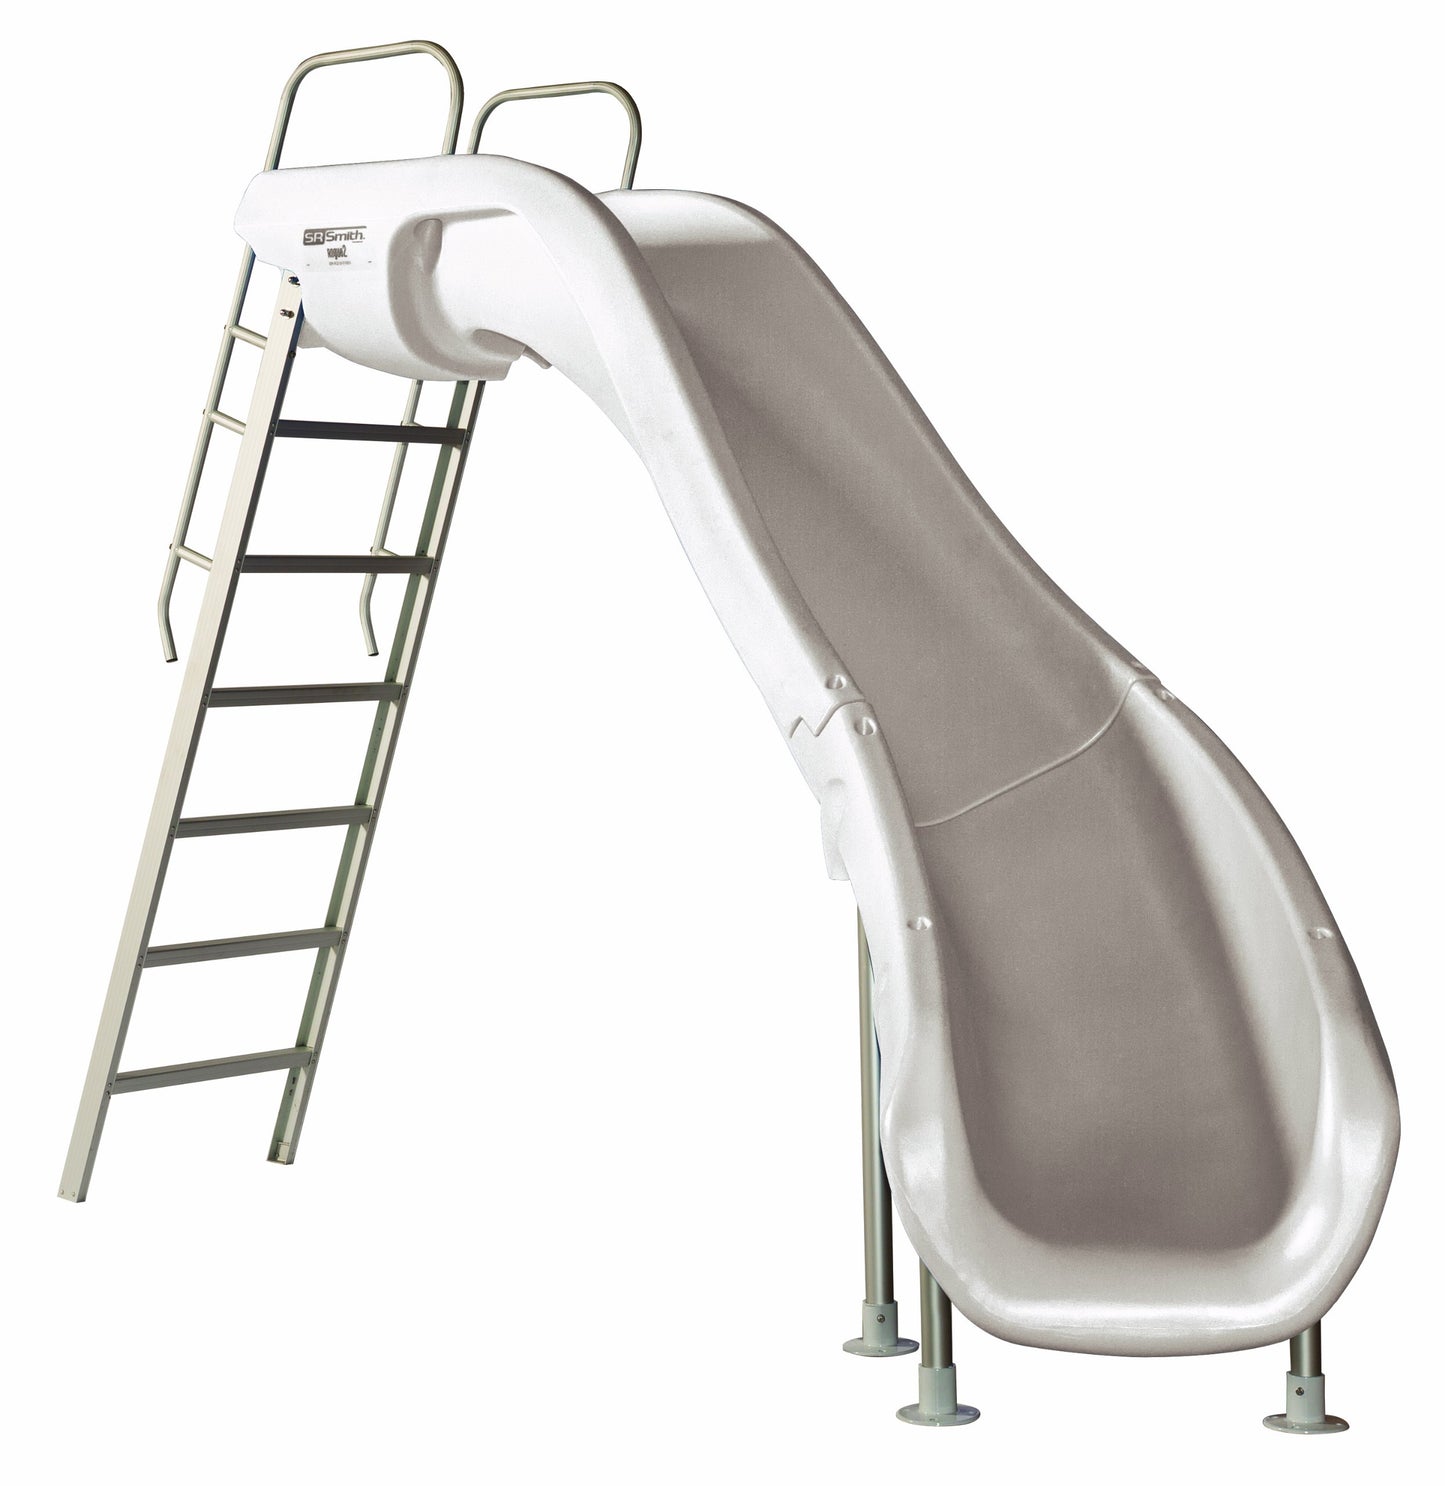 S.R. Smith 610-209-5822 Rogue2 Pool Slide, White Left Curve Rogue2 Pool Slide610-209-5812